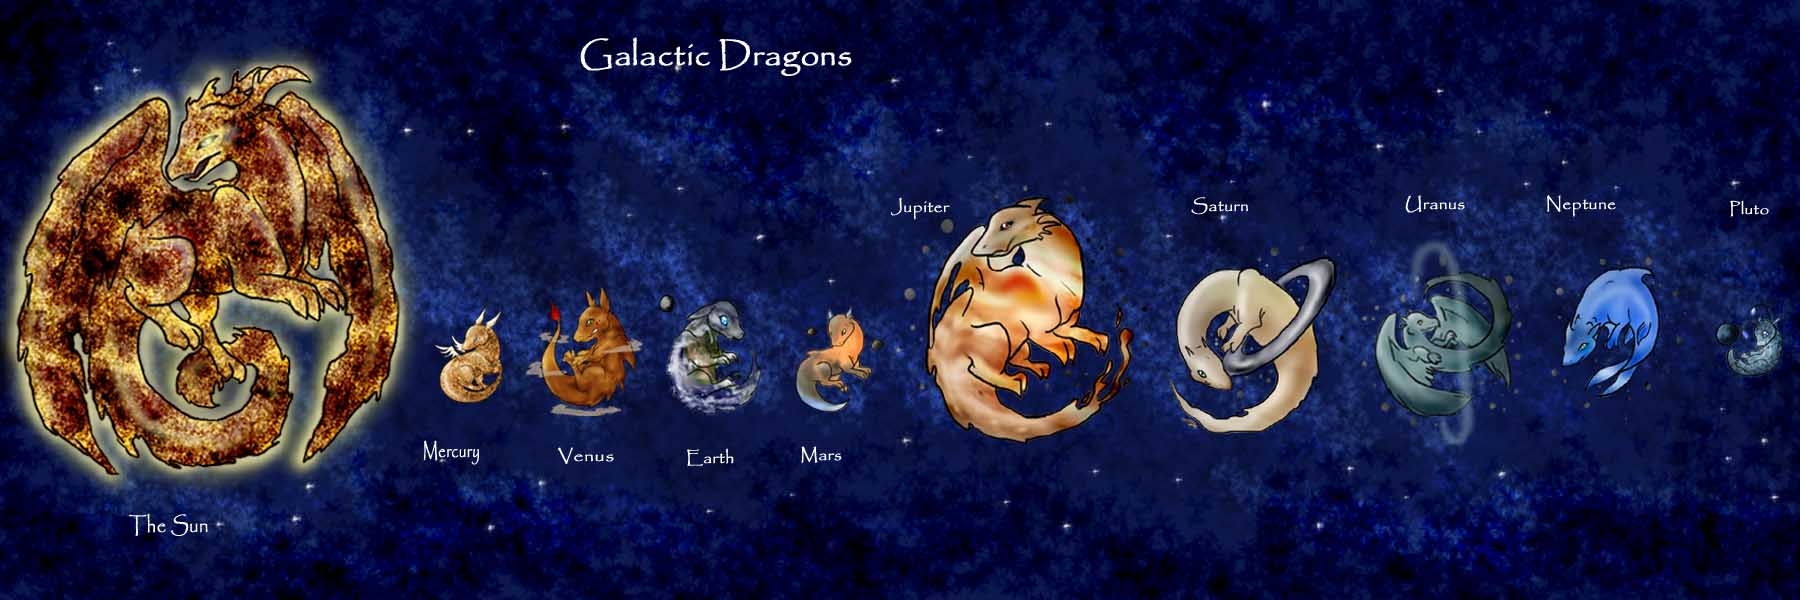 Galactic Dragons by dragon_ally